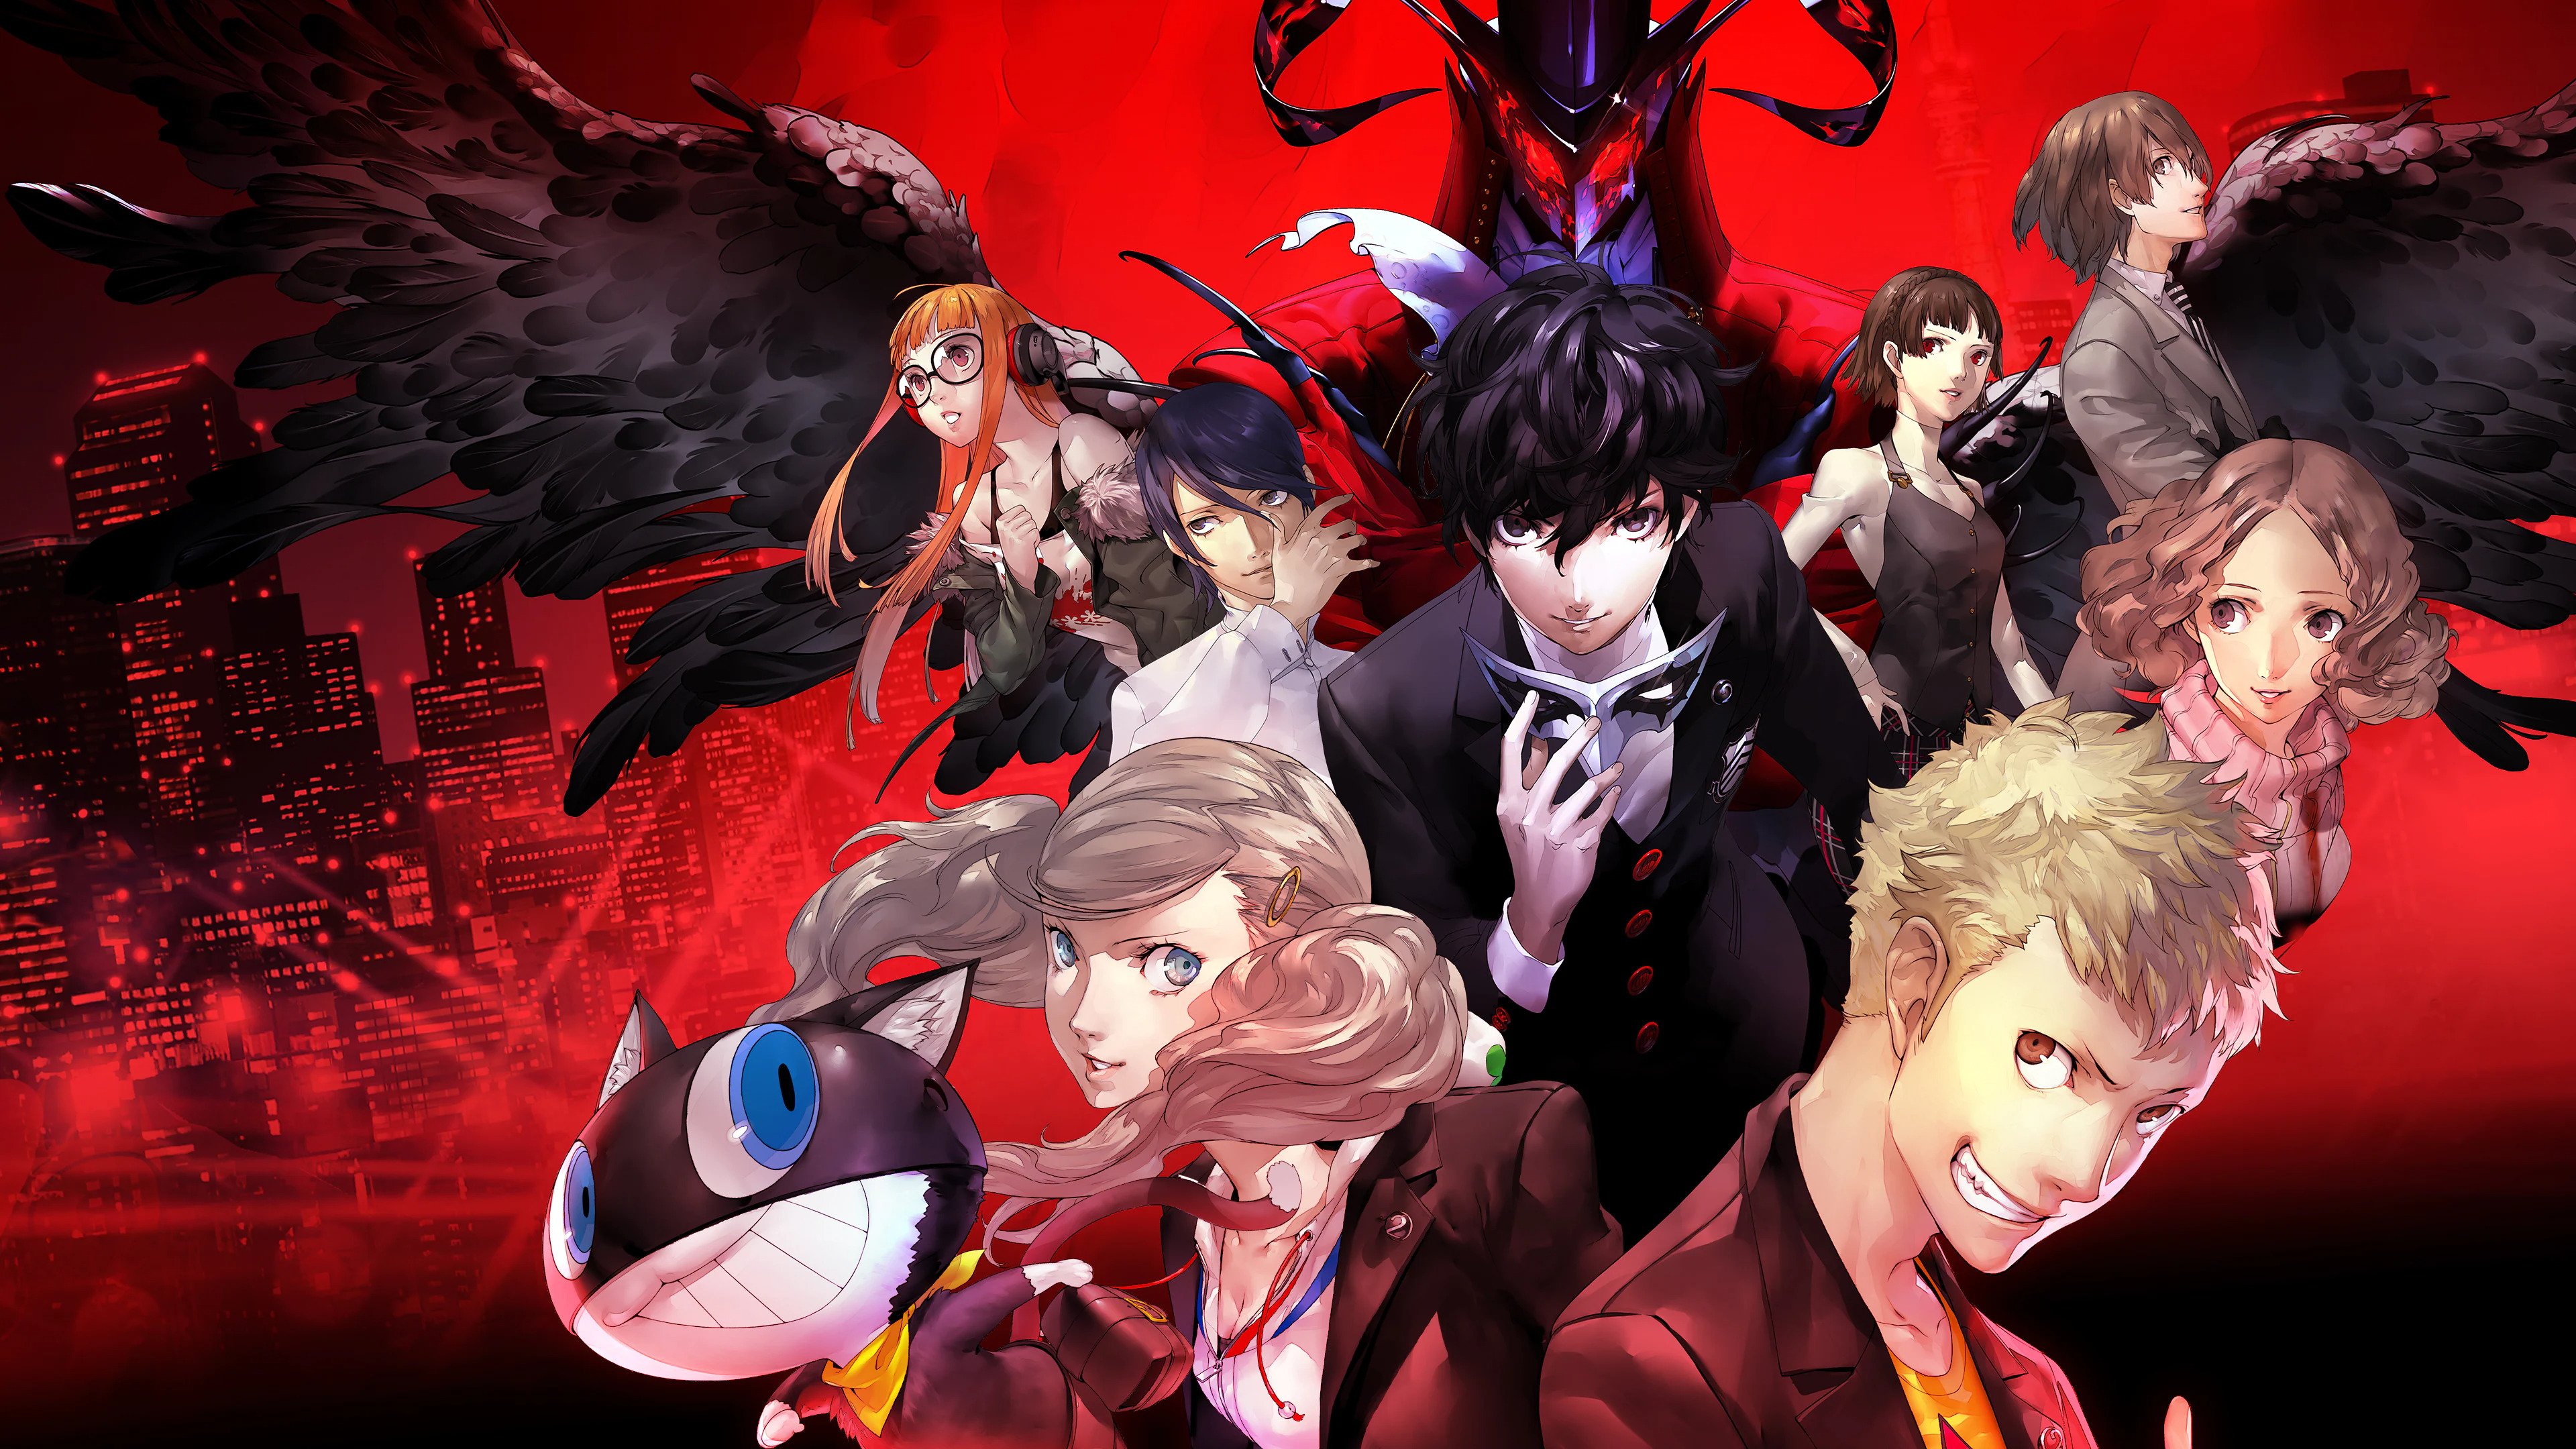 Persona 5 Royal First Gameplay Live Stream Announced for August 2, 2019 -  Persona Central